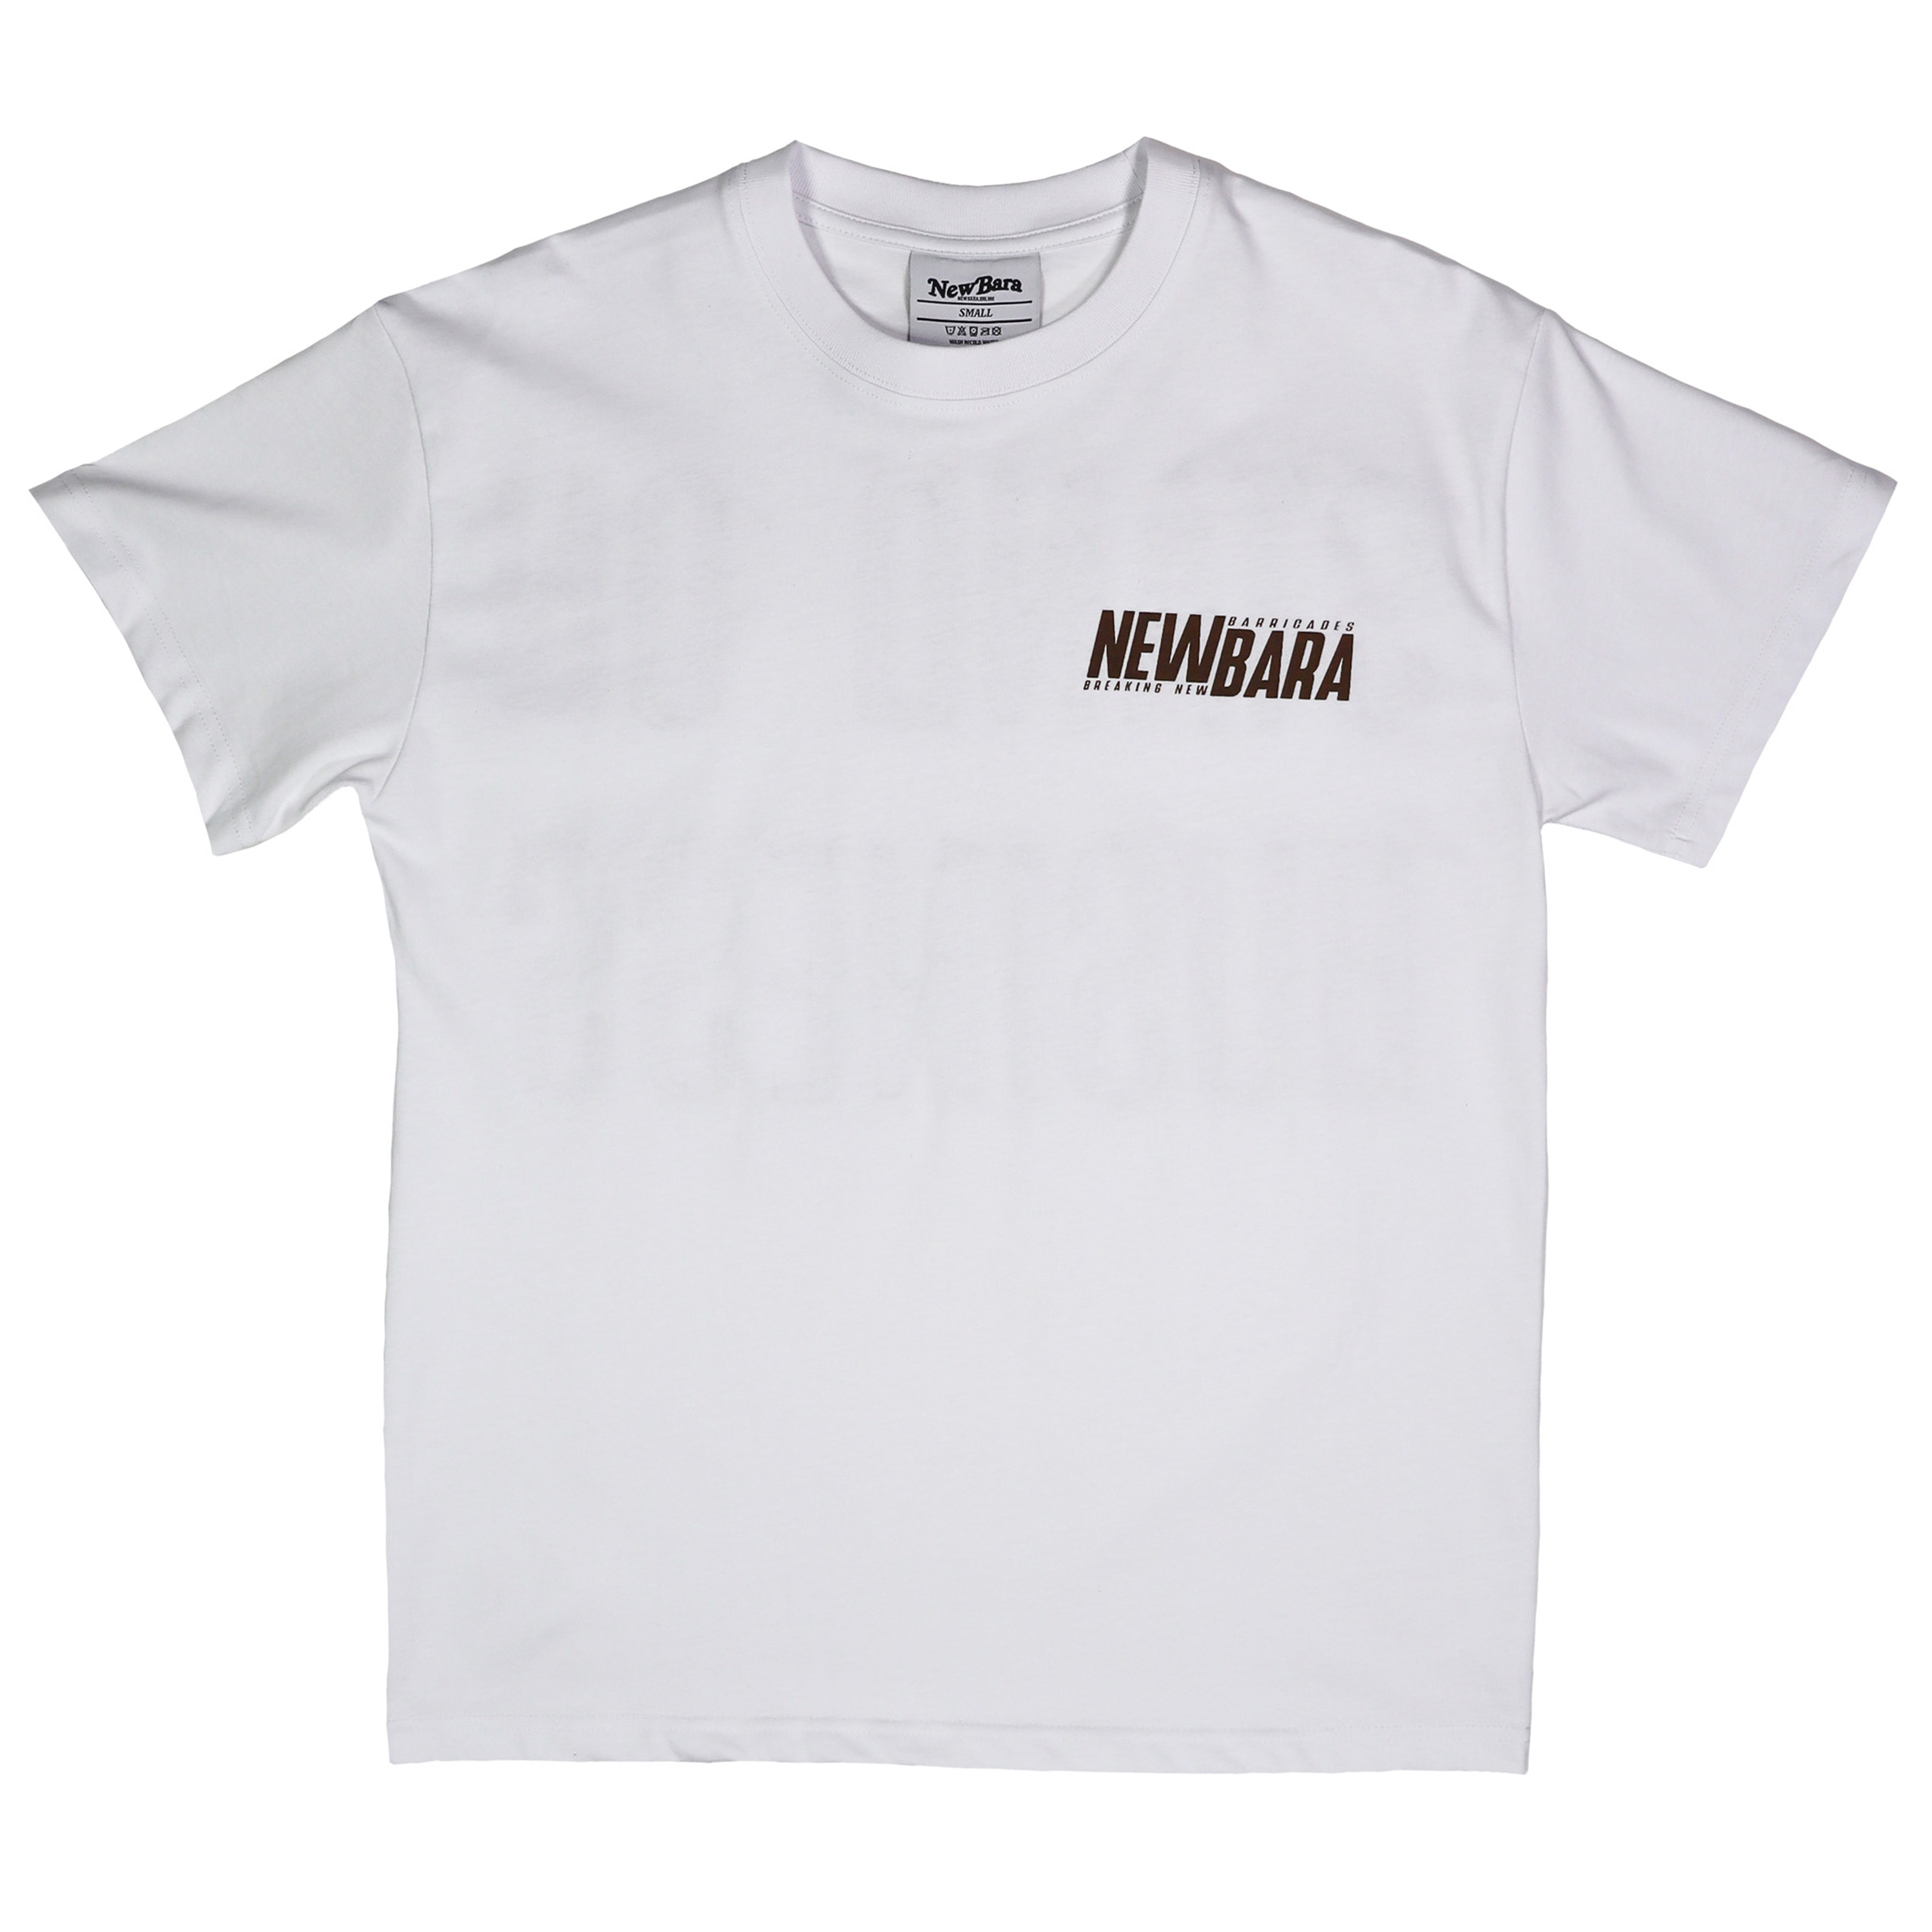 Stand On Business T-Shirt Mocha